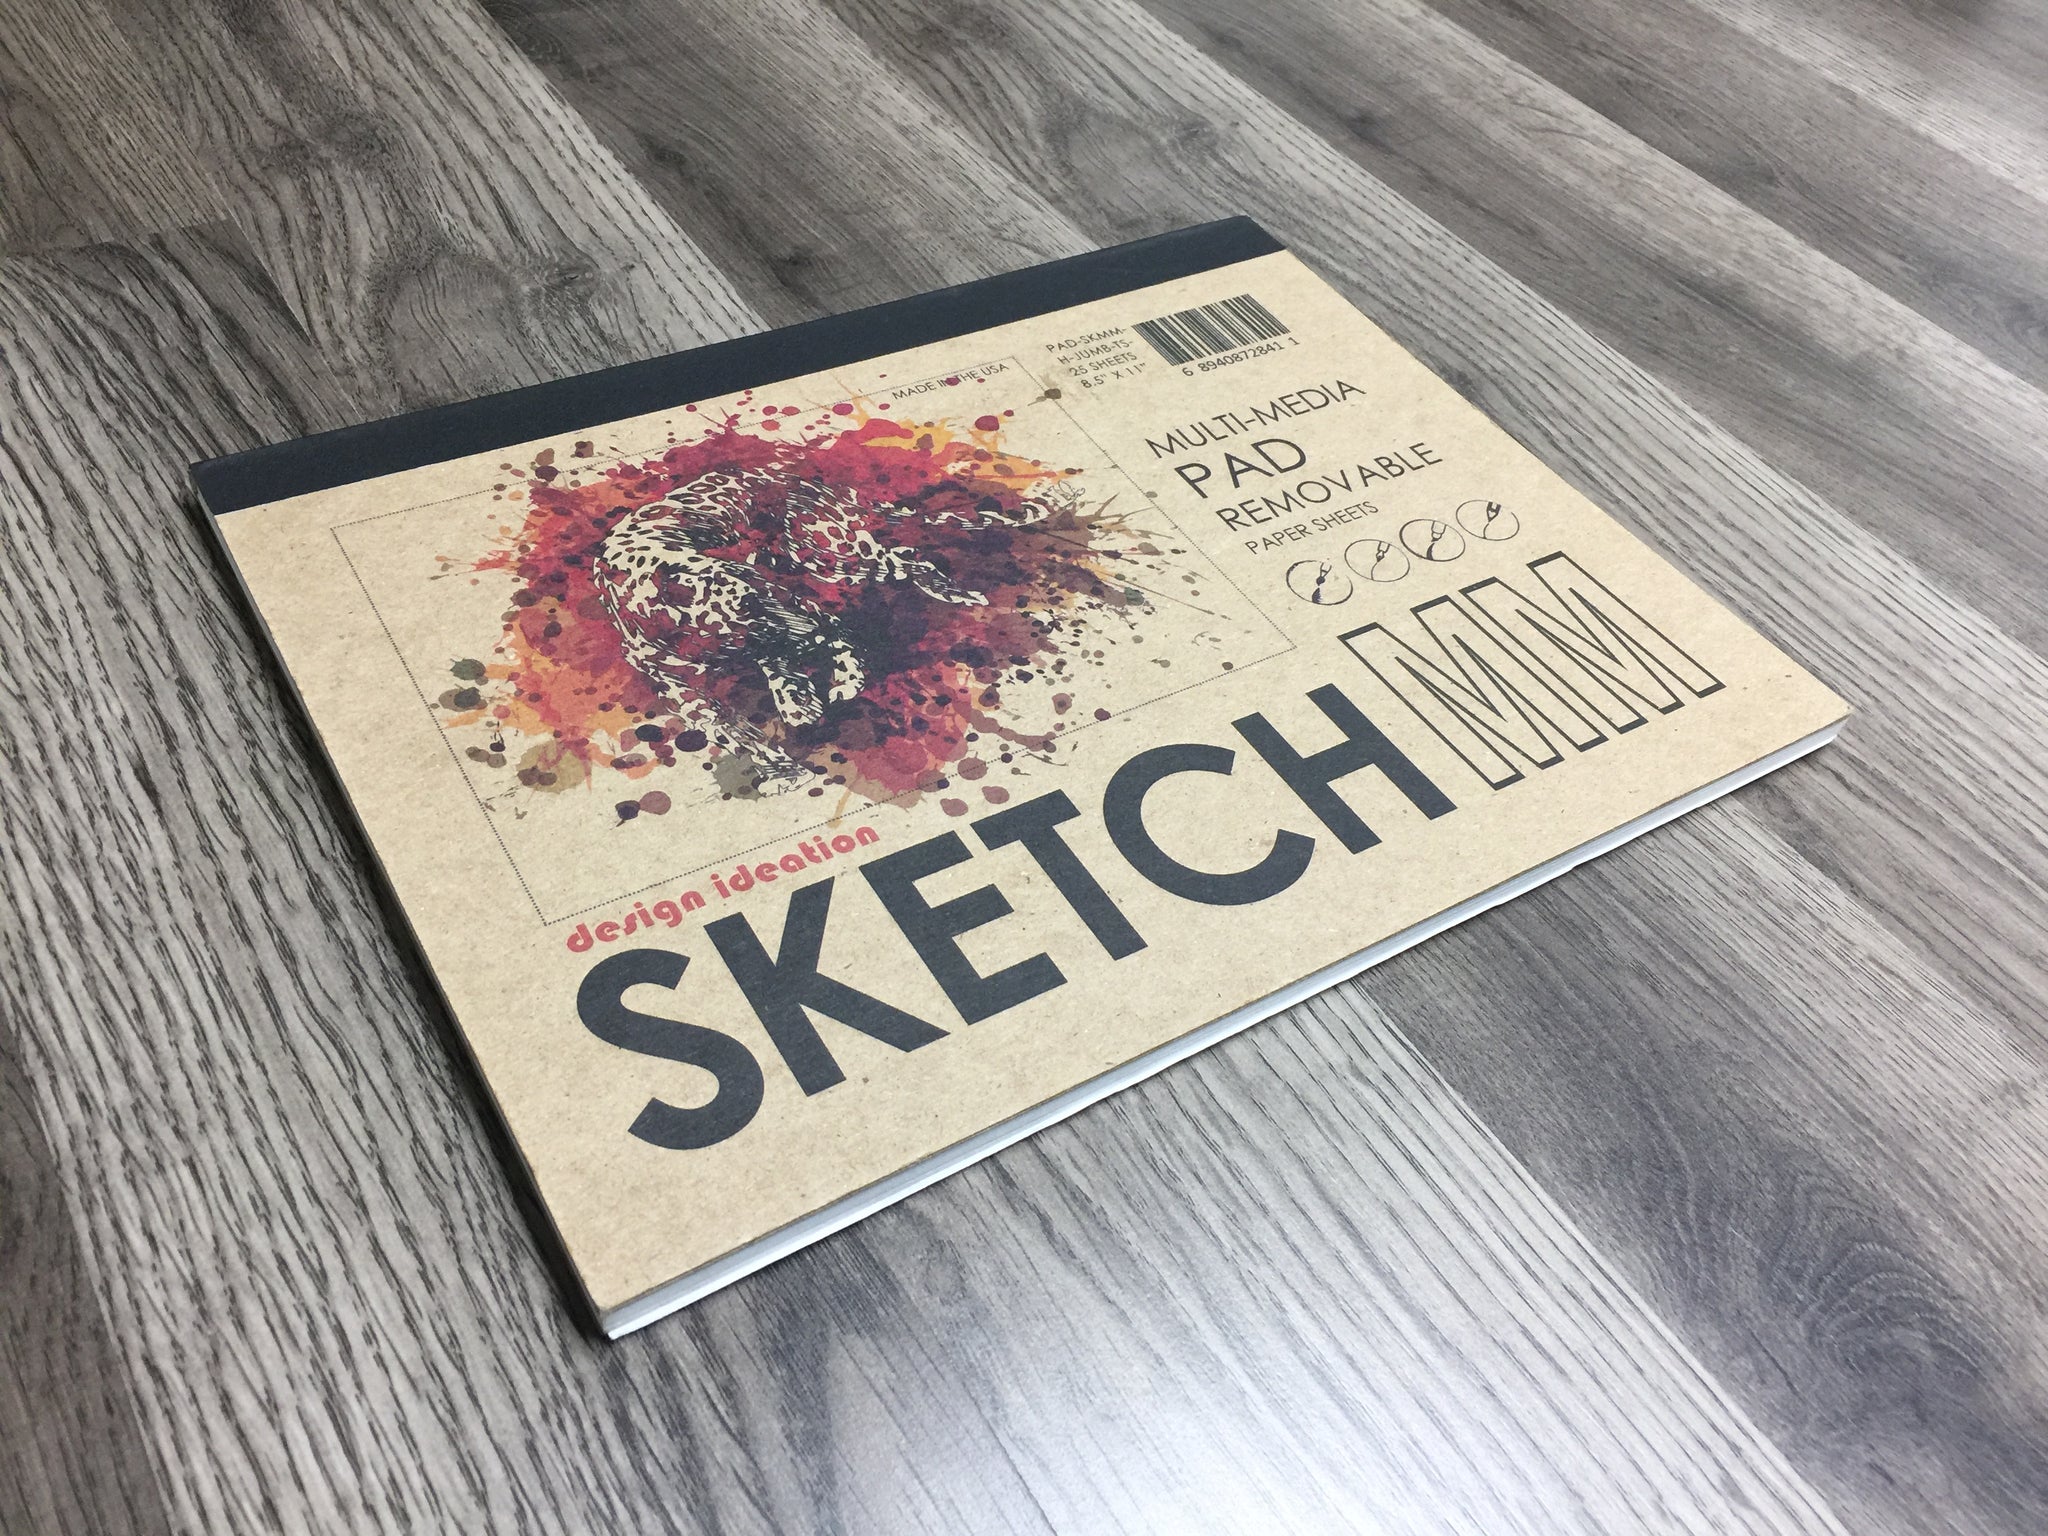 Sketch Pad Pictures | Download Free Images on Unsplash